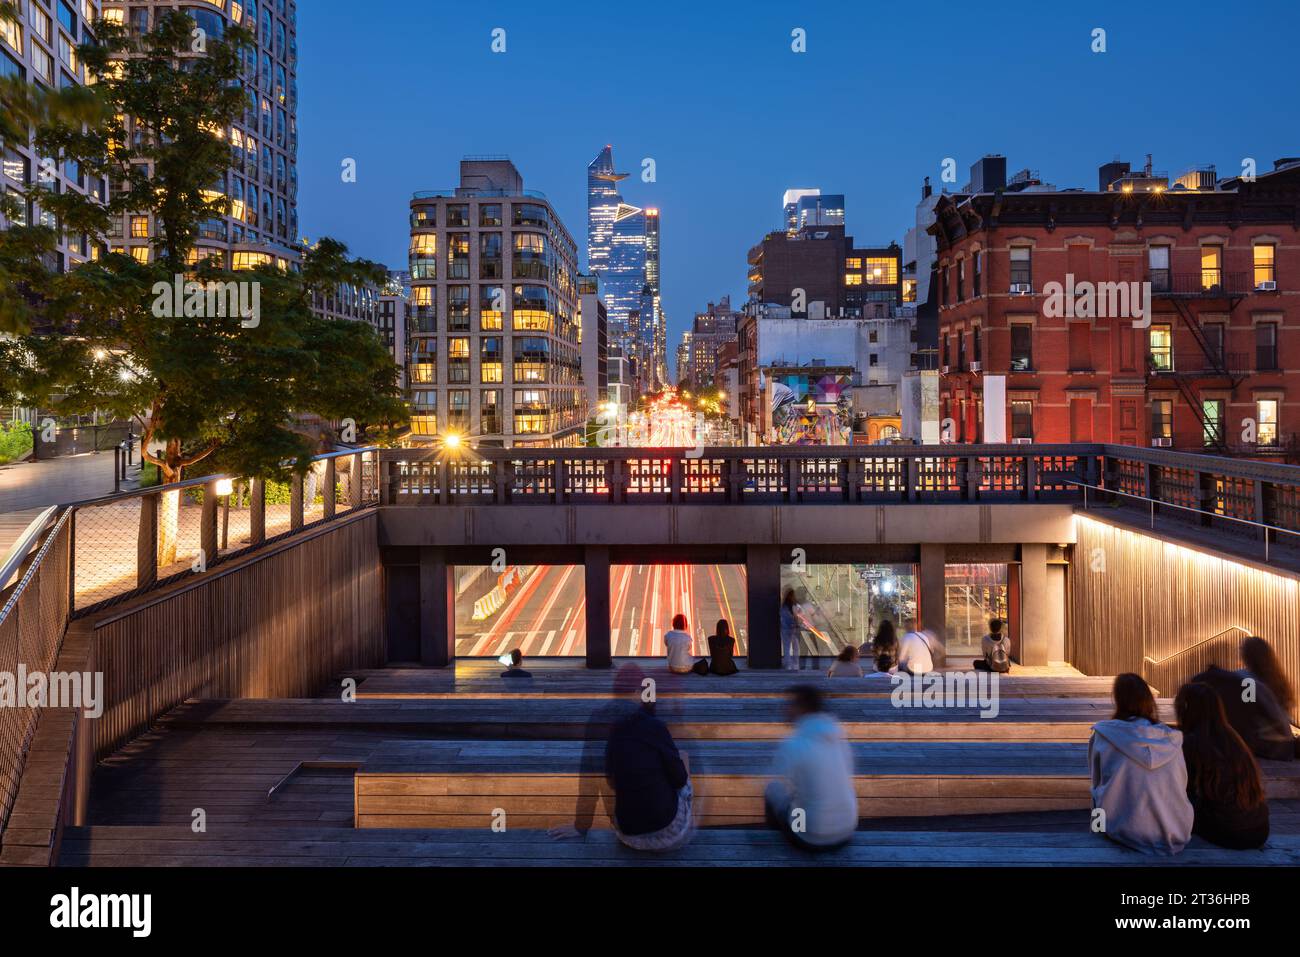 A summer evening at the Highline lookout (High Line Park) on 10th Avenue with view of the Hudson Yards skyscrapers. Chelsea, Manhattan, New York City Stock Photo